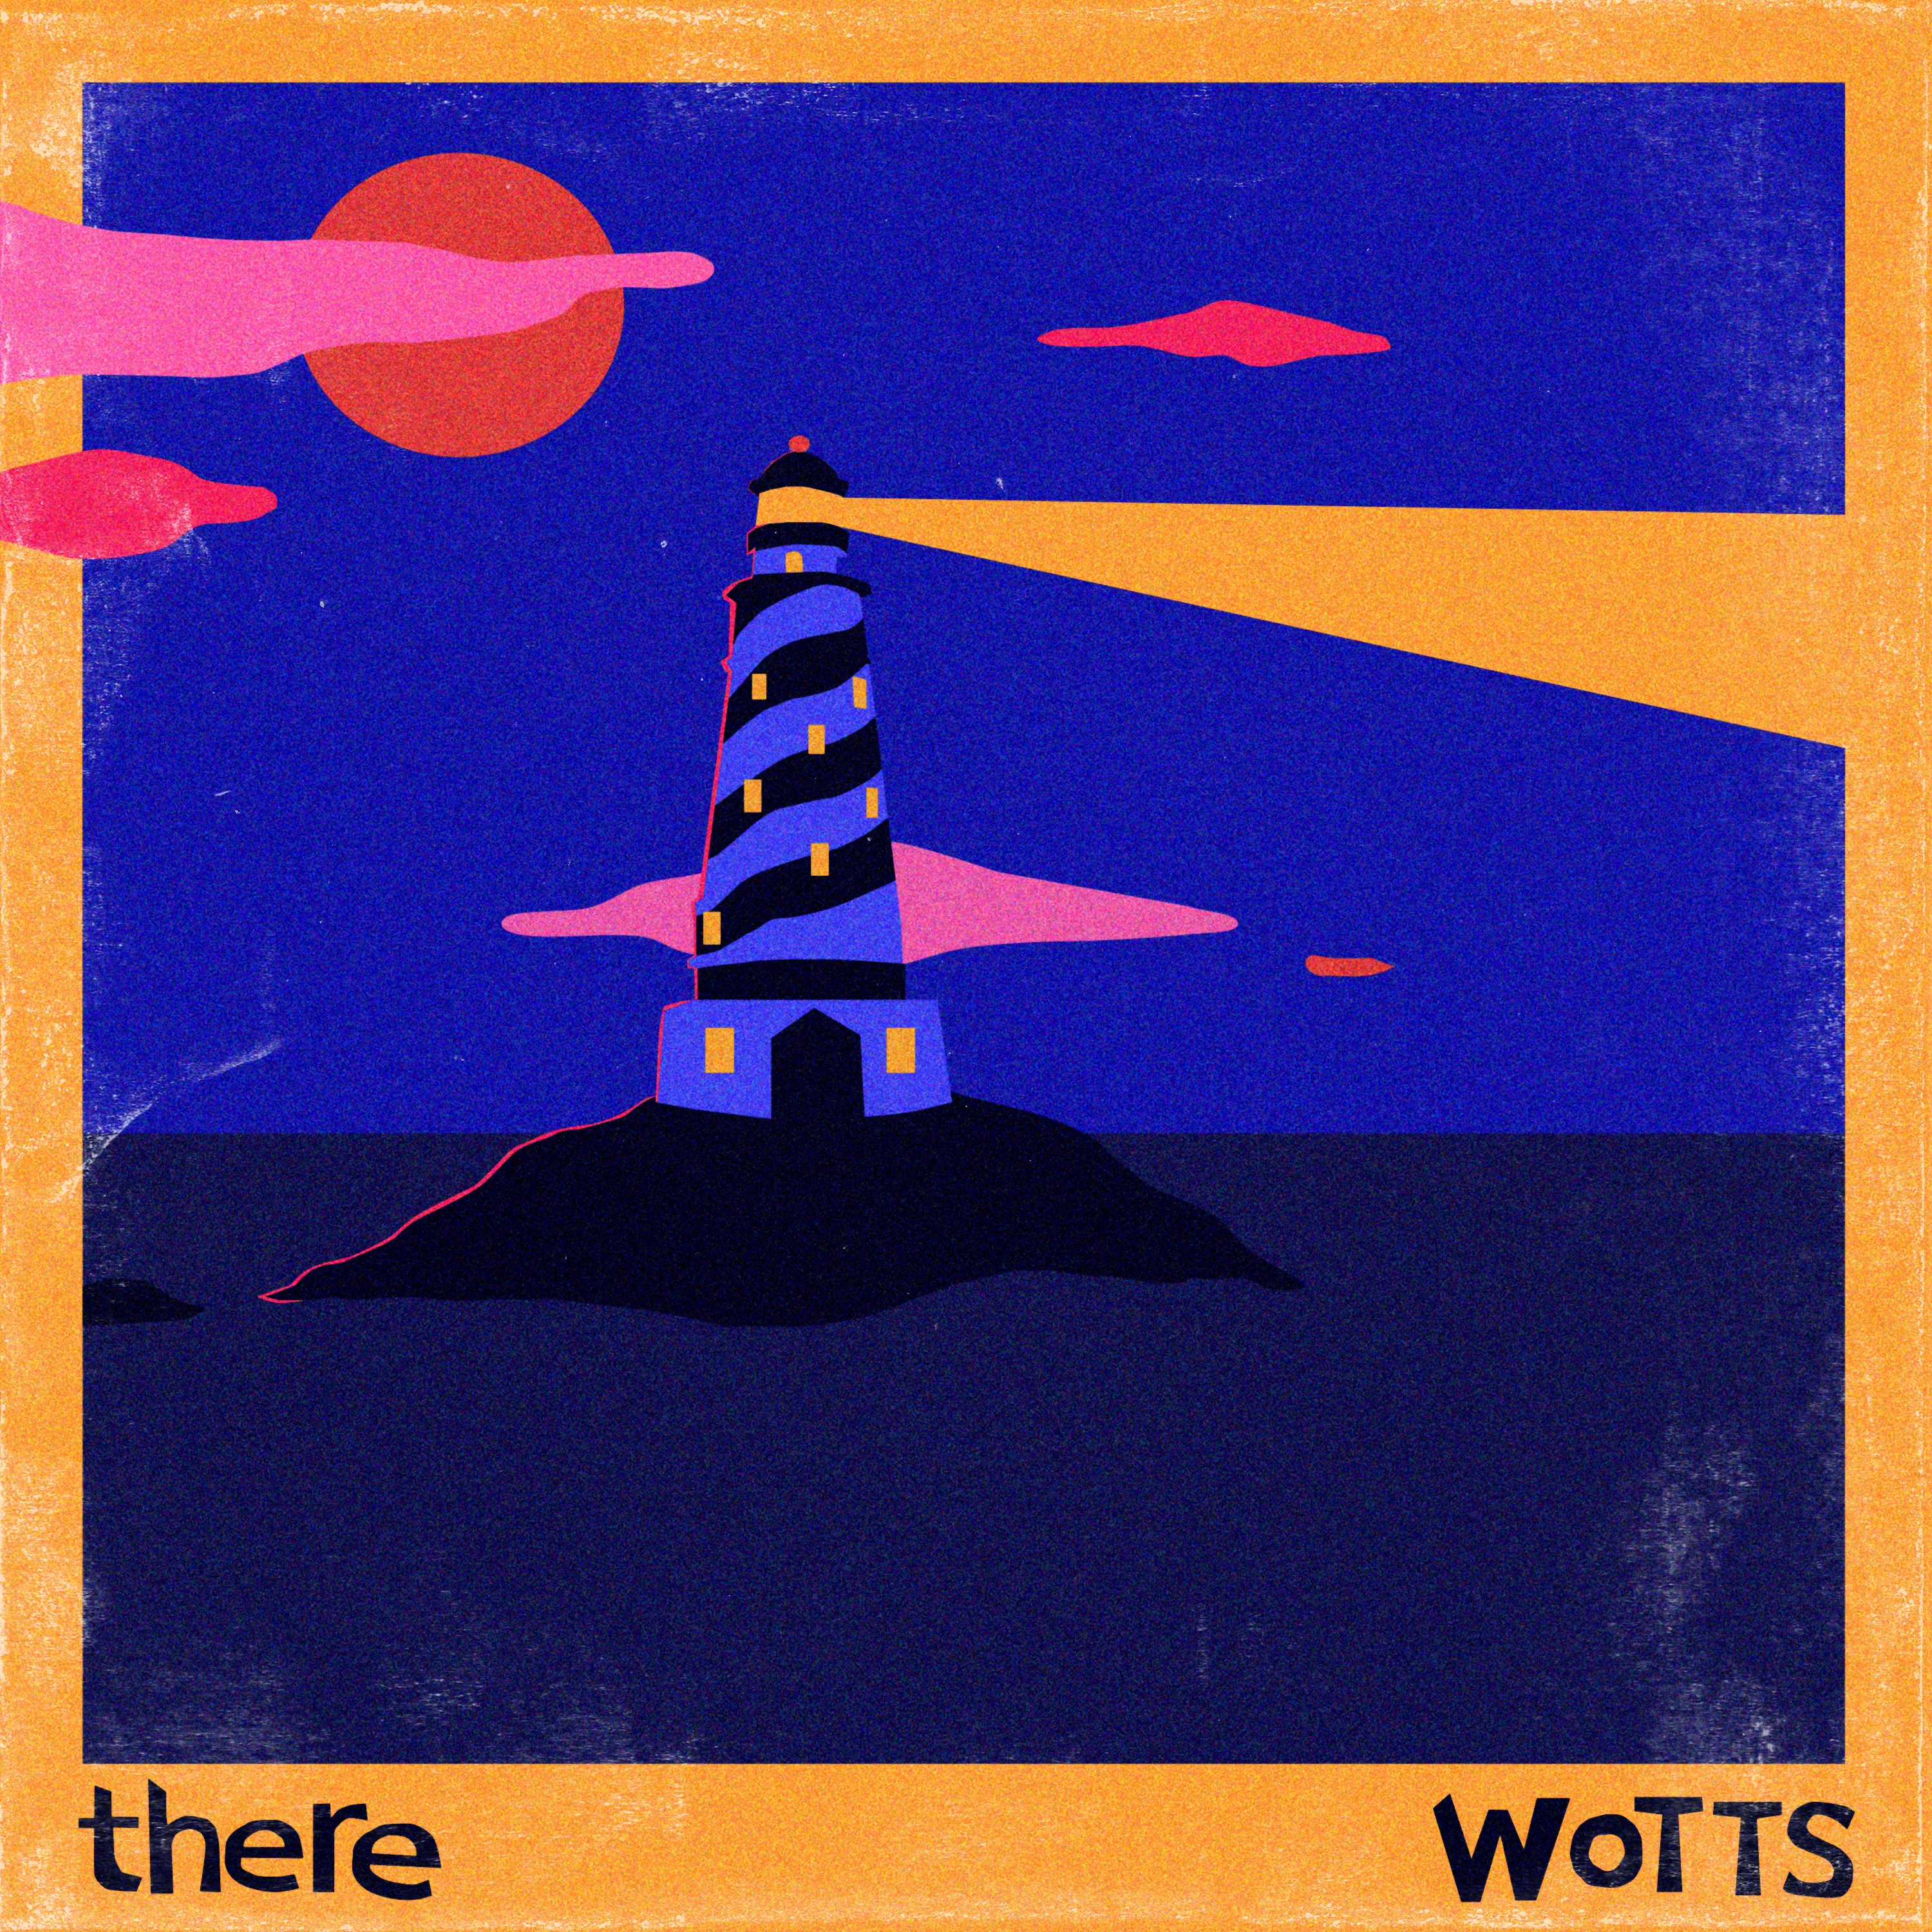 Wotts – “there”